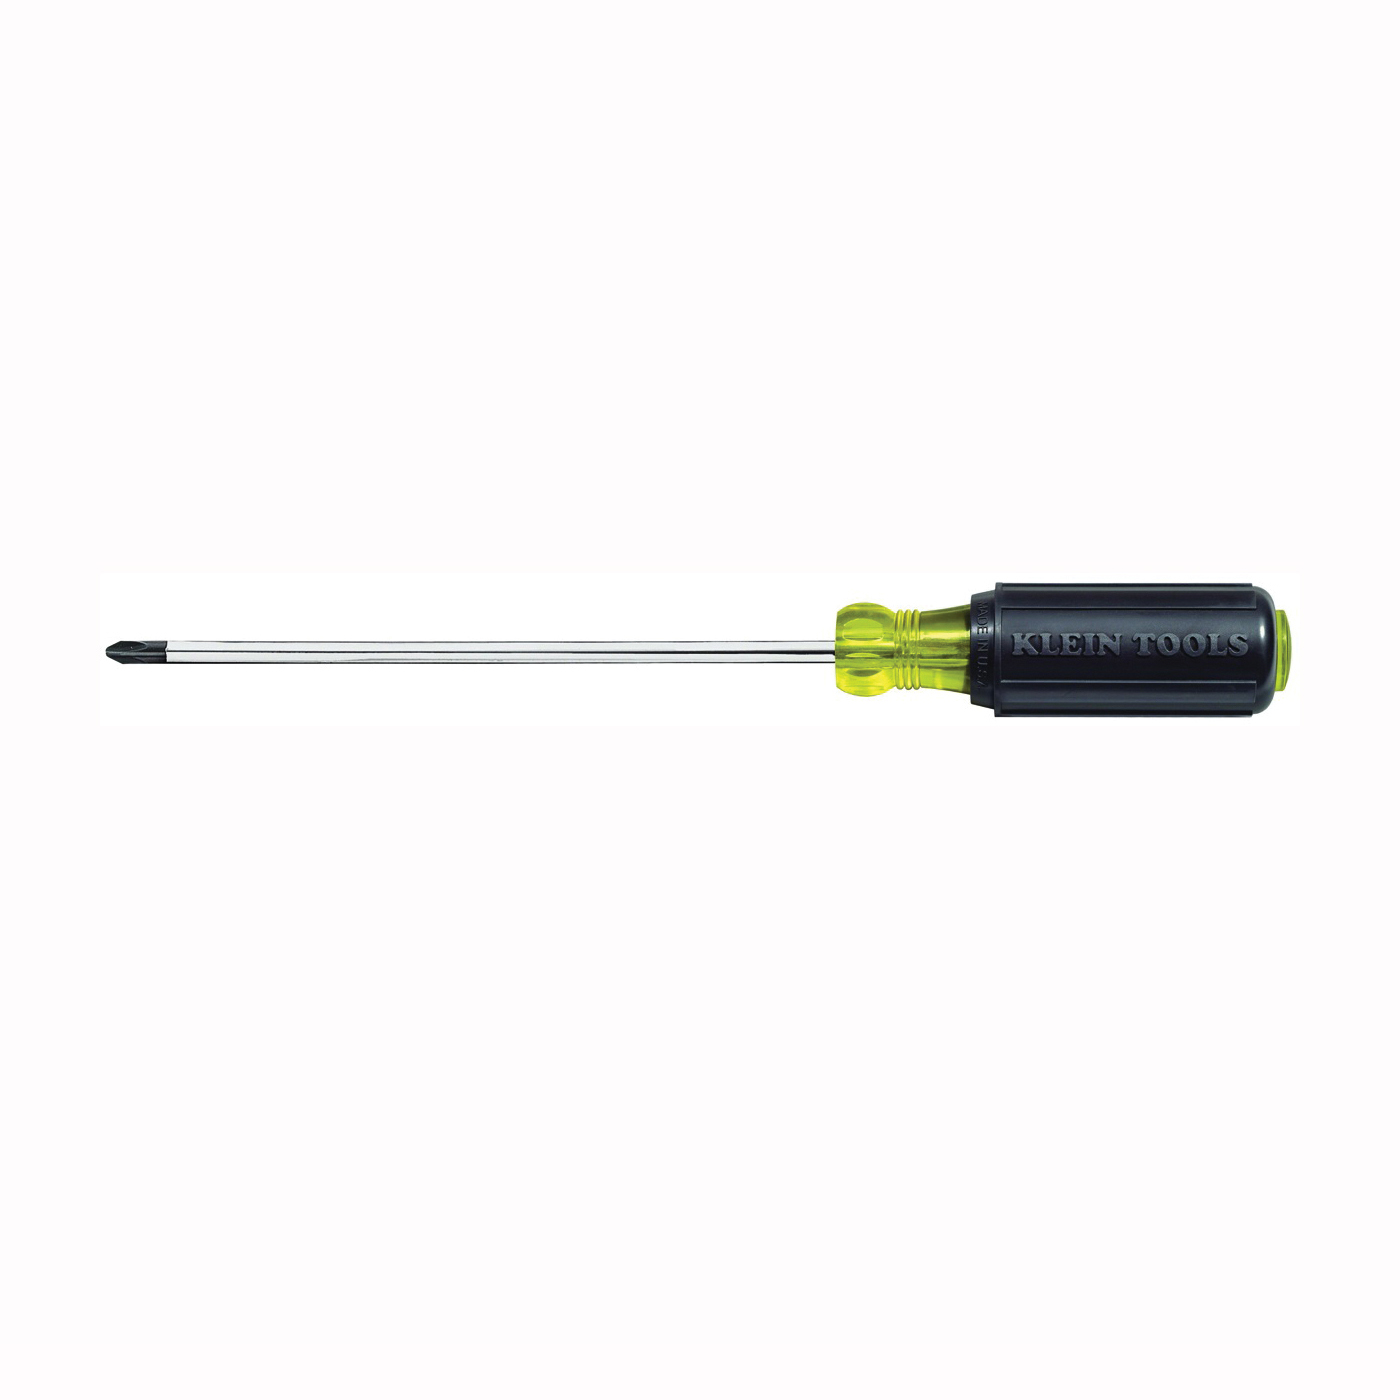 603-7 Screwdriver, #2 Drive, Phillips Drive, 11-5/16 in OAL, 7 in L Shank, Rubber Handle